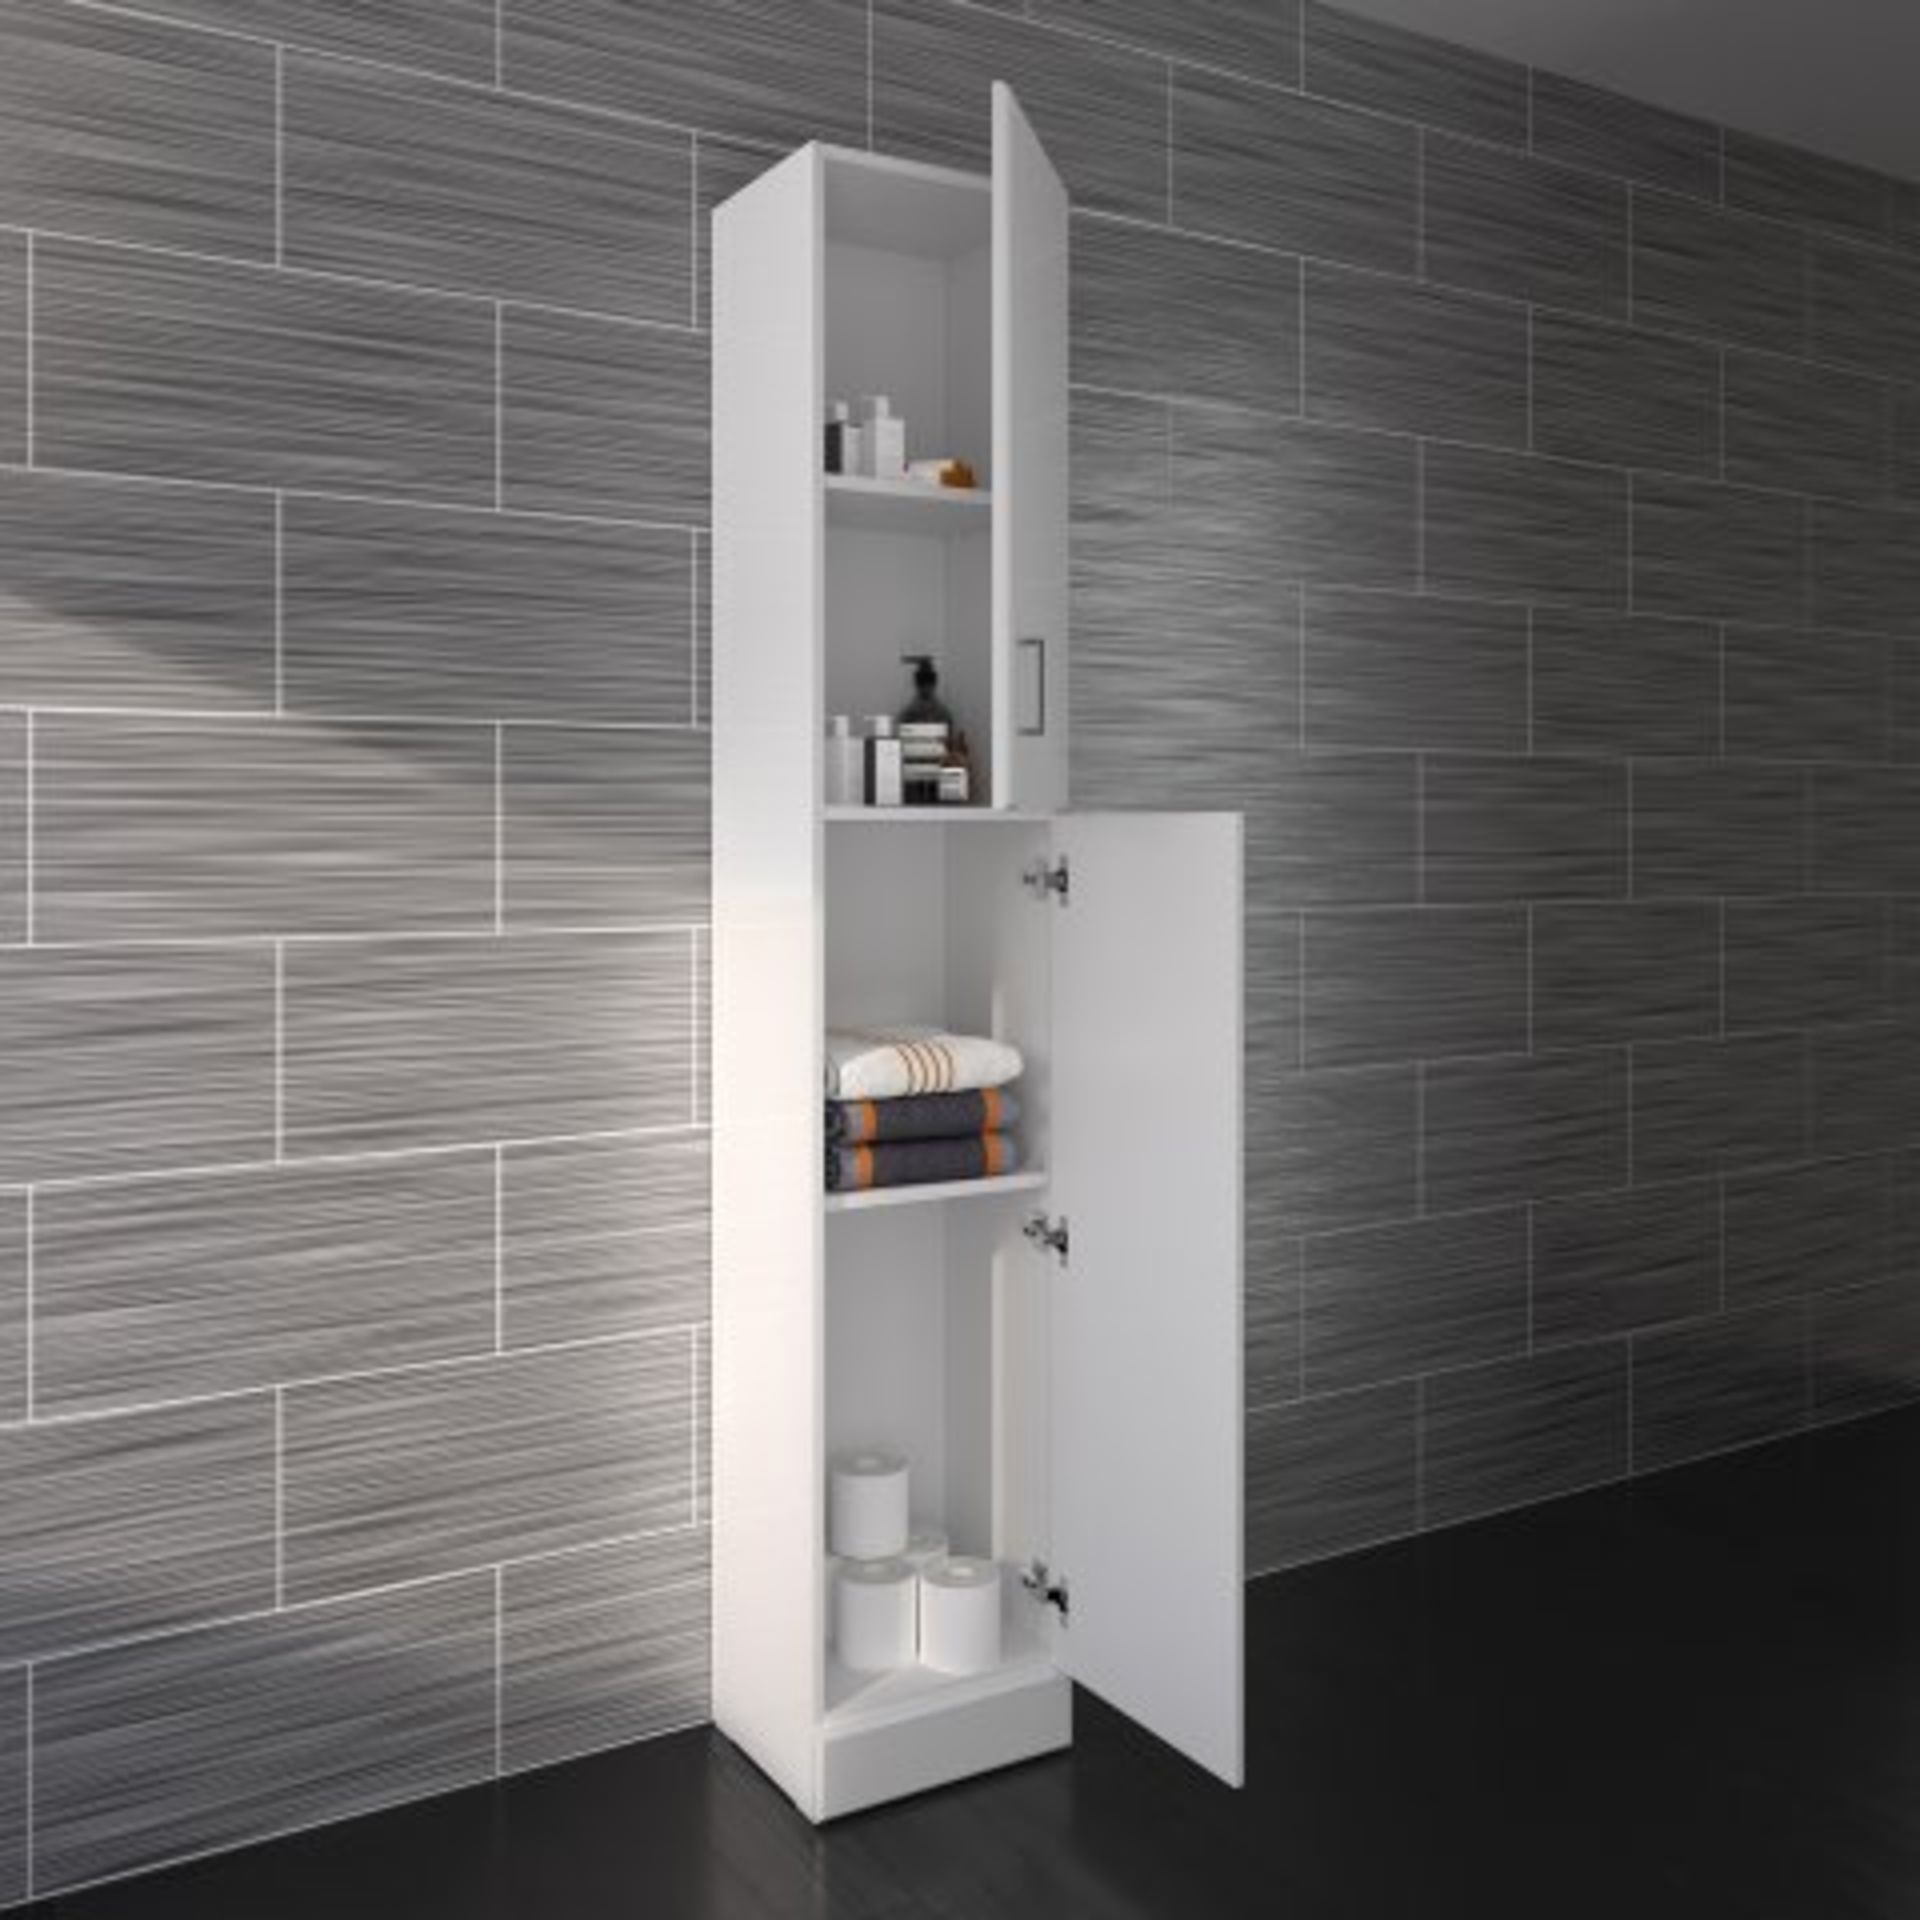 (L72) 1900x300mm Quartz Gloss White Tall Storage Cabinet - Floor Standing. RRP £251.99. Contemporary - Image 2 of 3